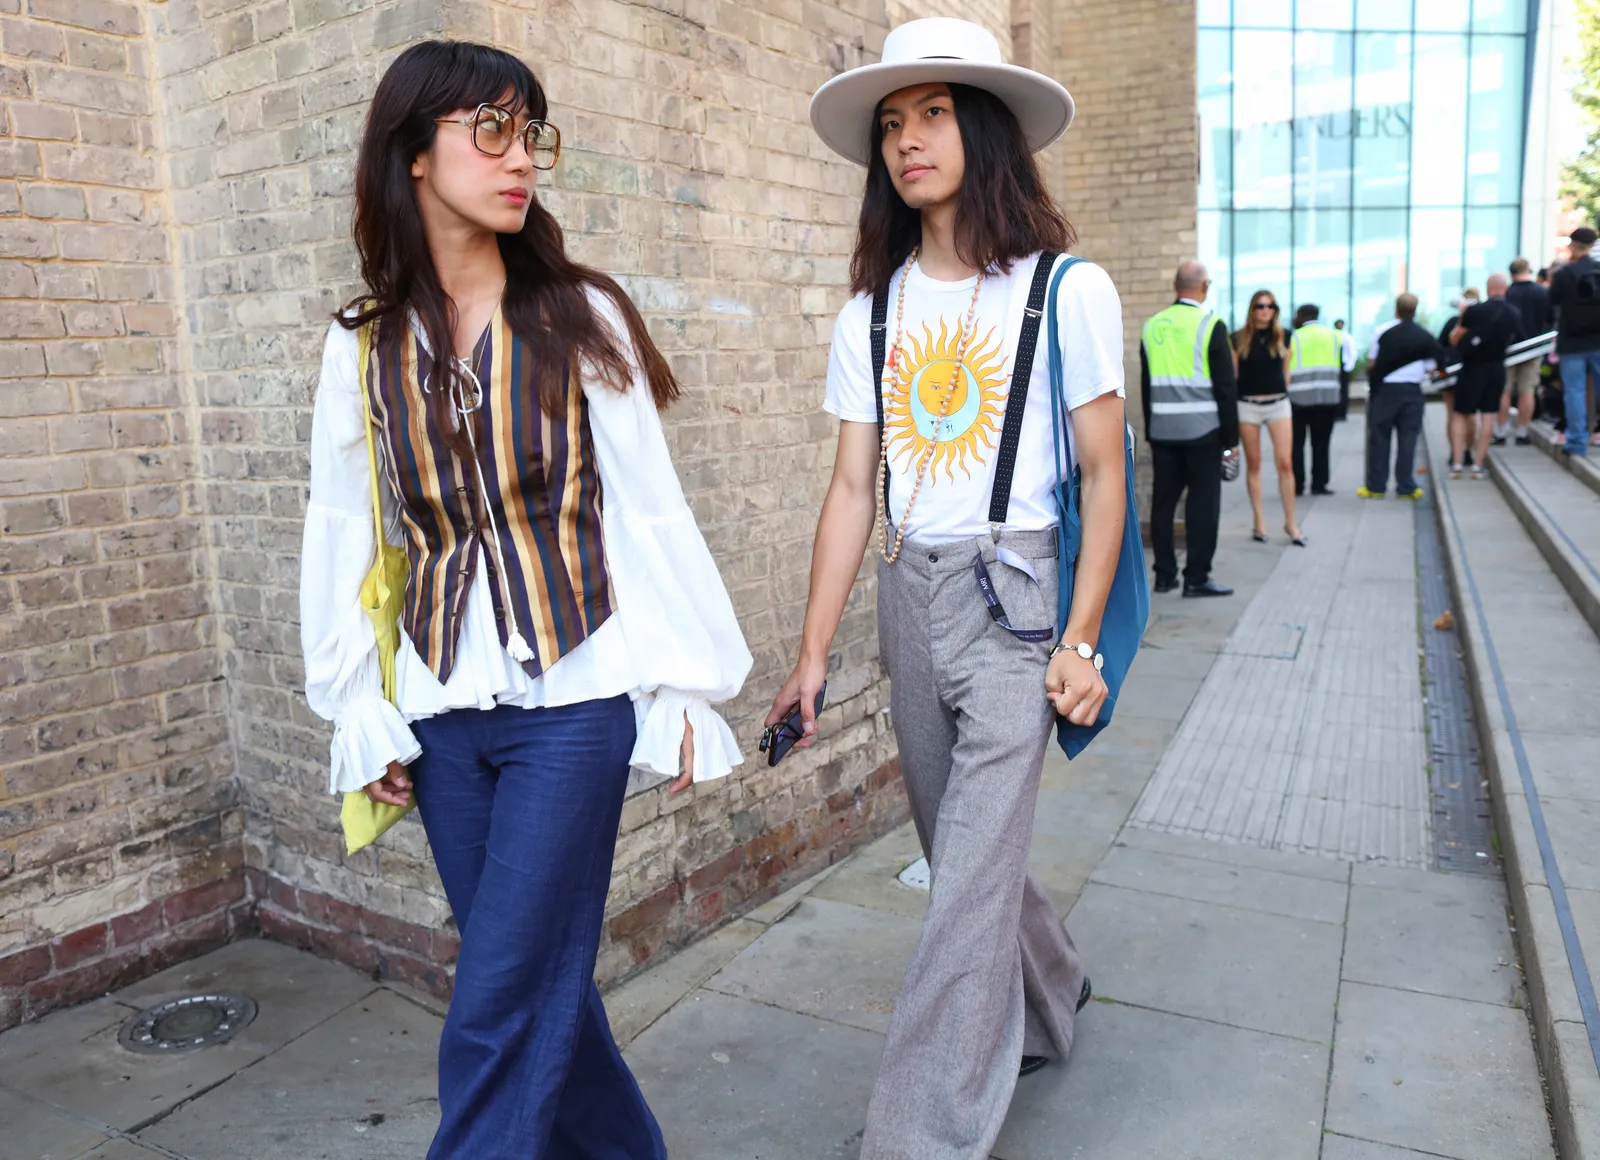 Another gorgeous street style moment at the London fashion week